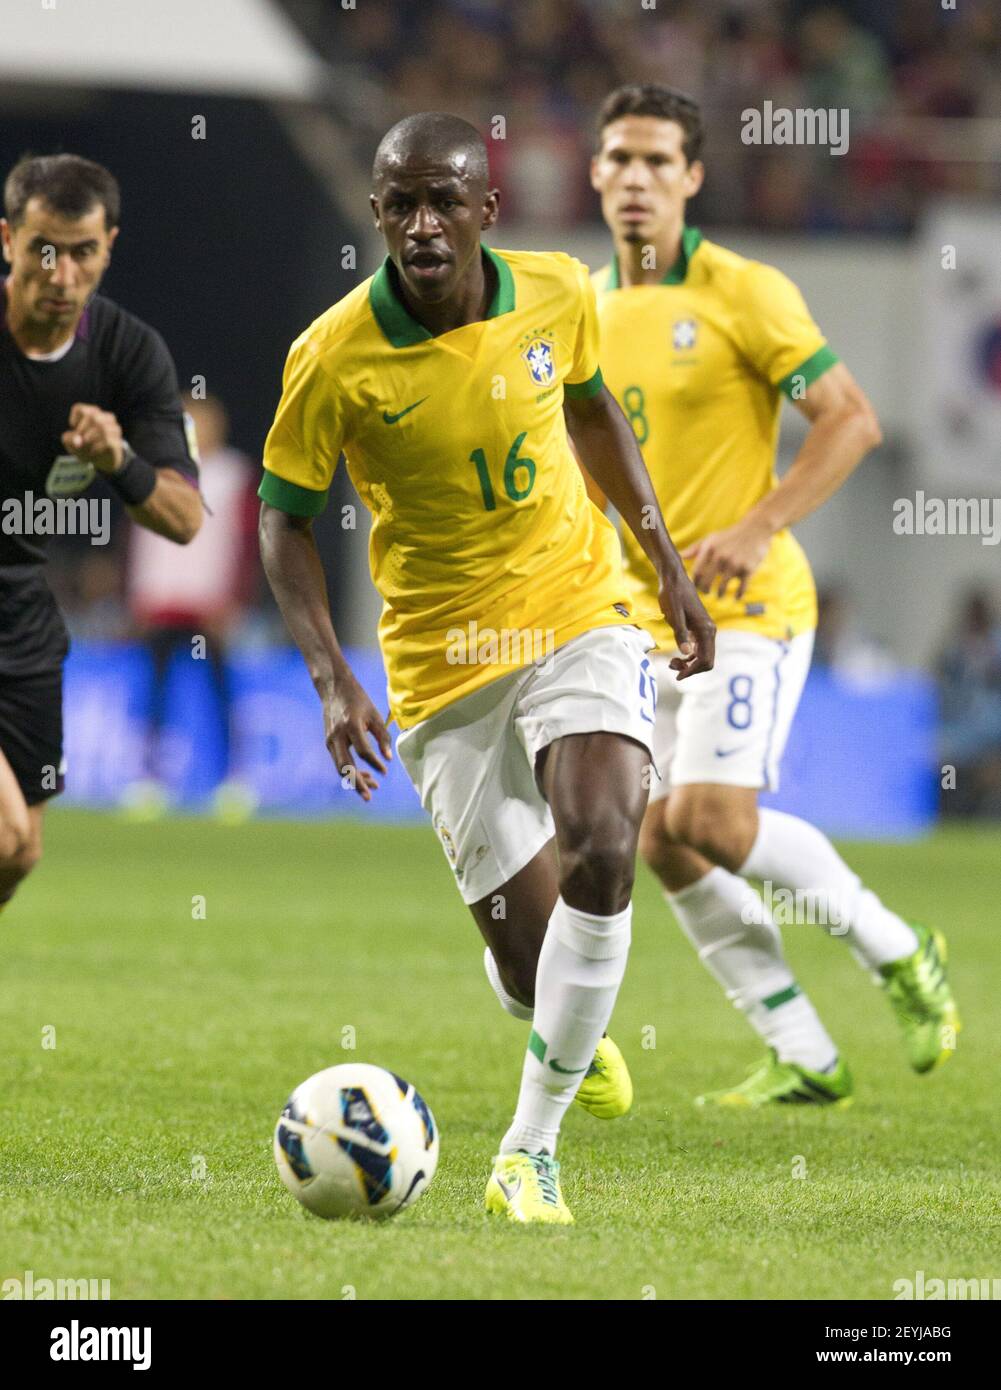 12 October 2013 - Seoul, South Korea : Brazil national soccer team player  Ramires, Chelsea F.C. Club, dribble for the ball during a International  friendly match against South Korea and Brazil at